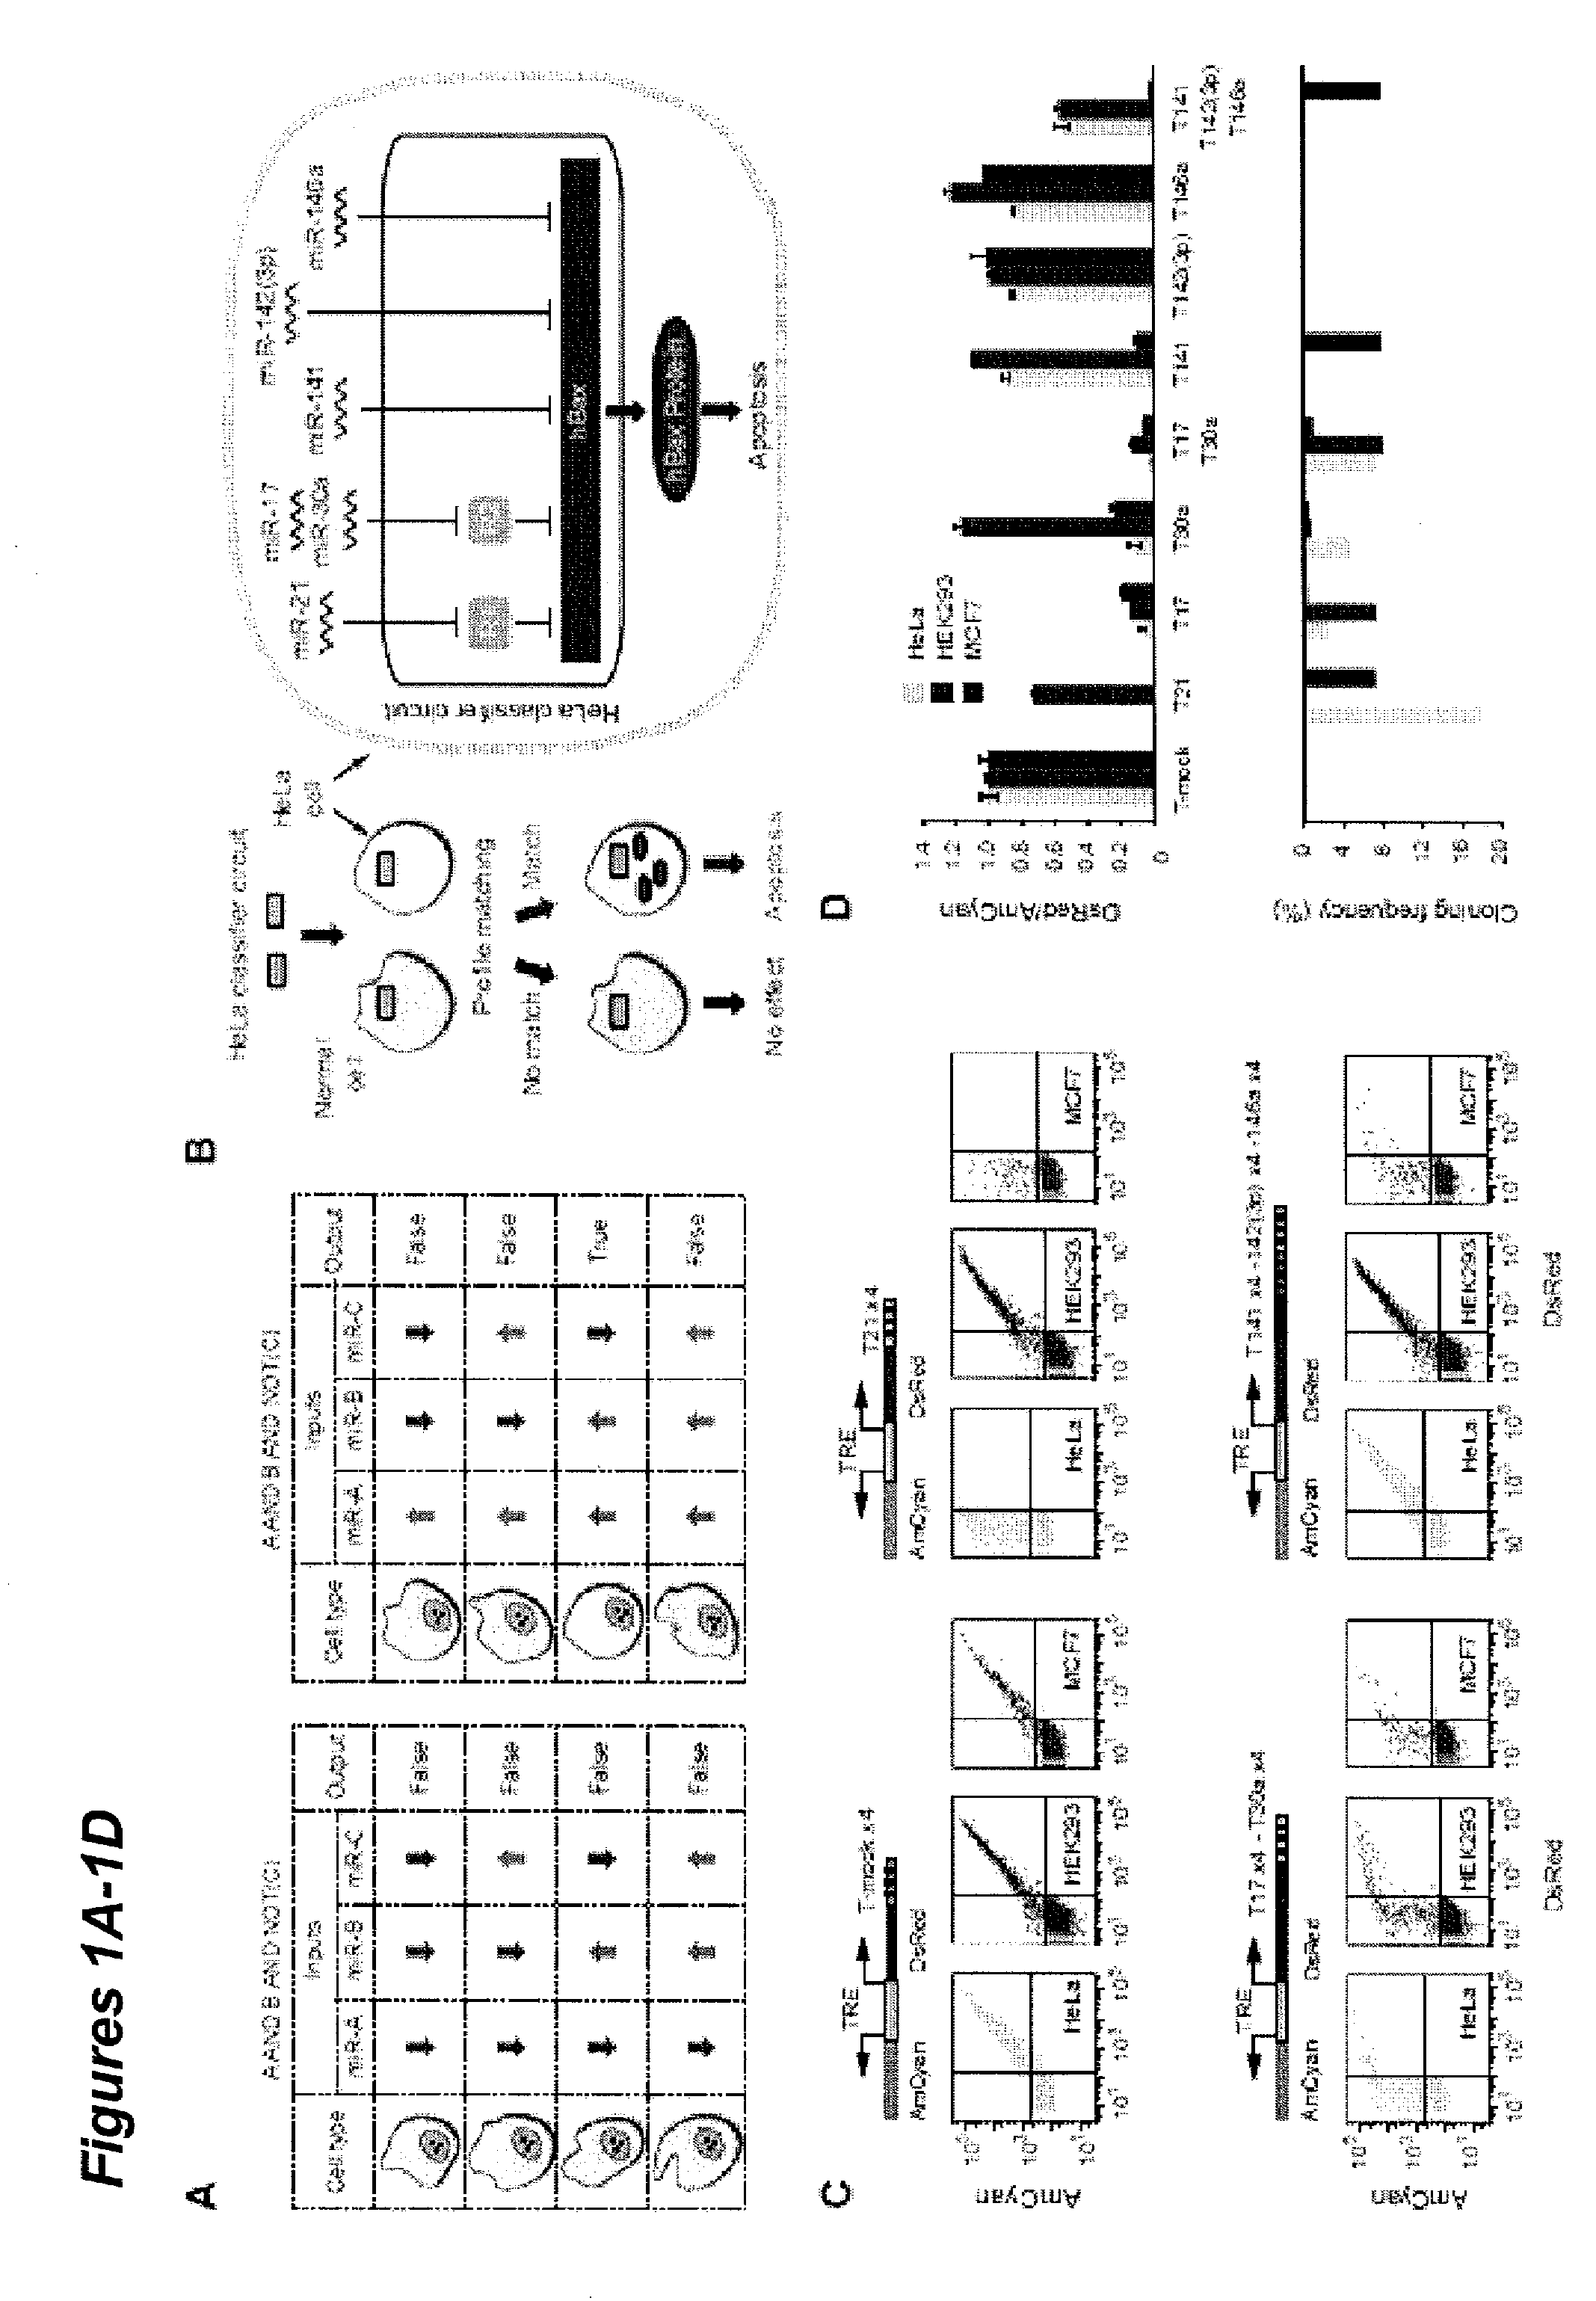 Multiple input biologic classifier circuits for cells